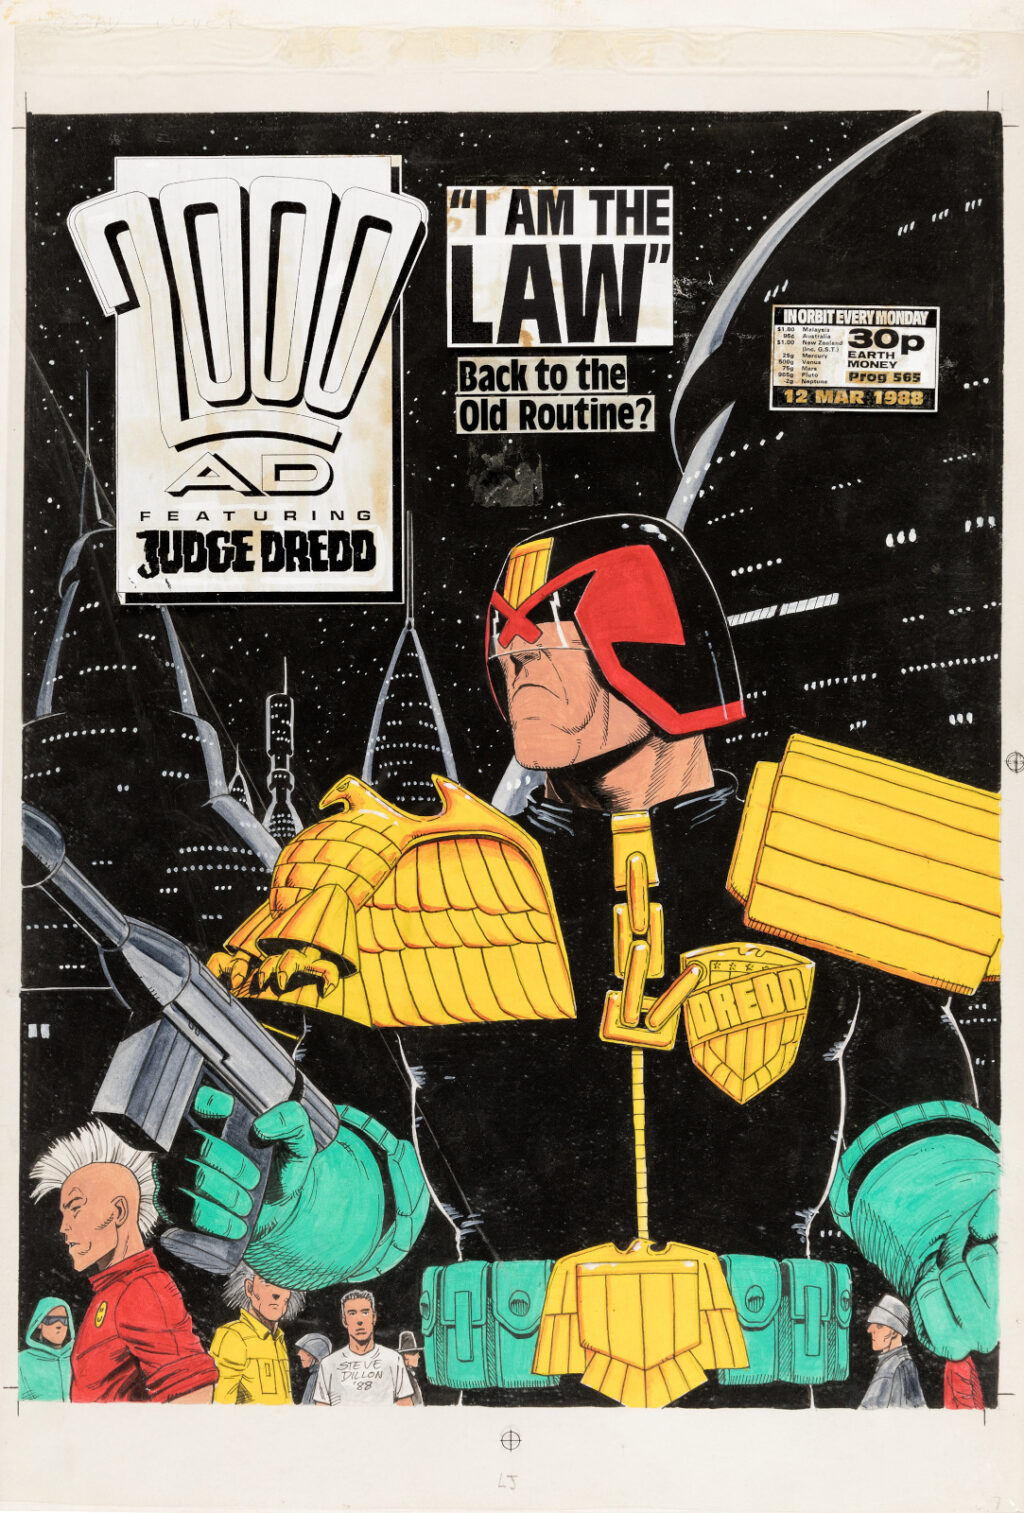 2000 AD issue 571 cover by Steve Dillon